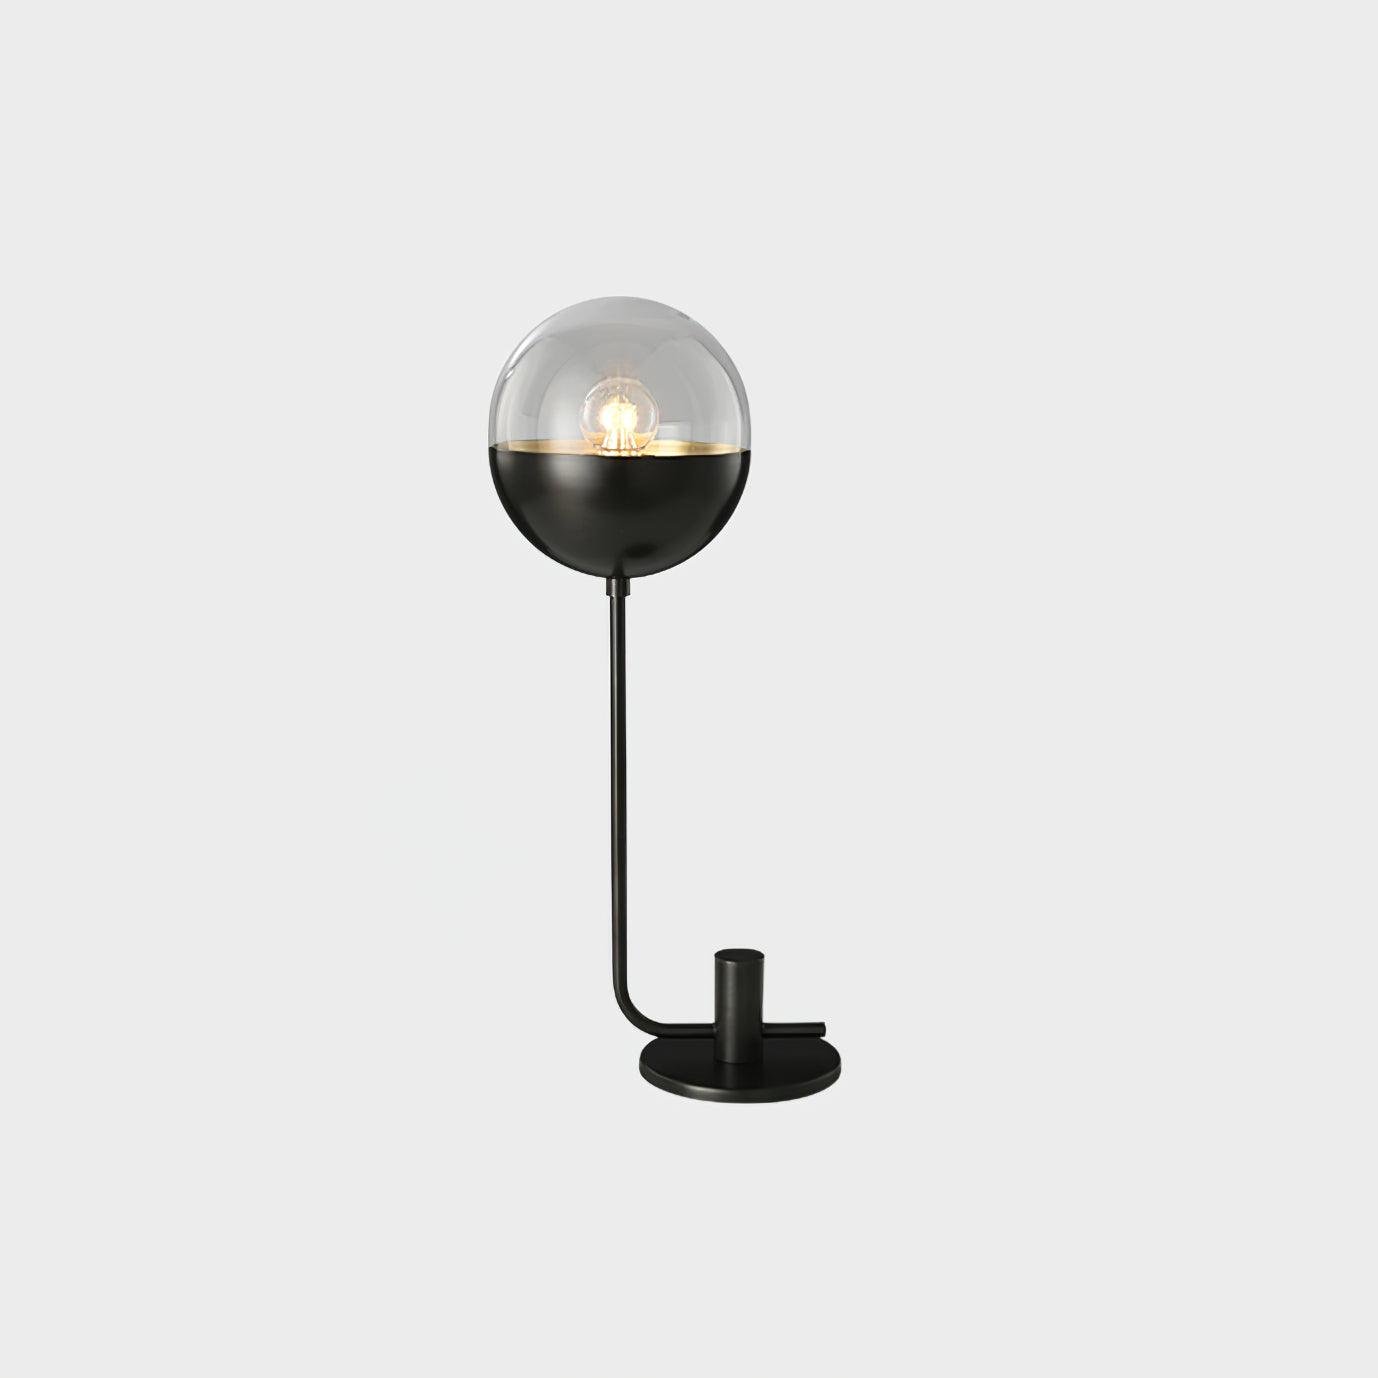 Black Brass Globular Table Lamp with EU Plug, measuring 8.3 inches in diameter and 17.7 inches in height (or 21cm x 45cm).